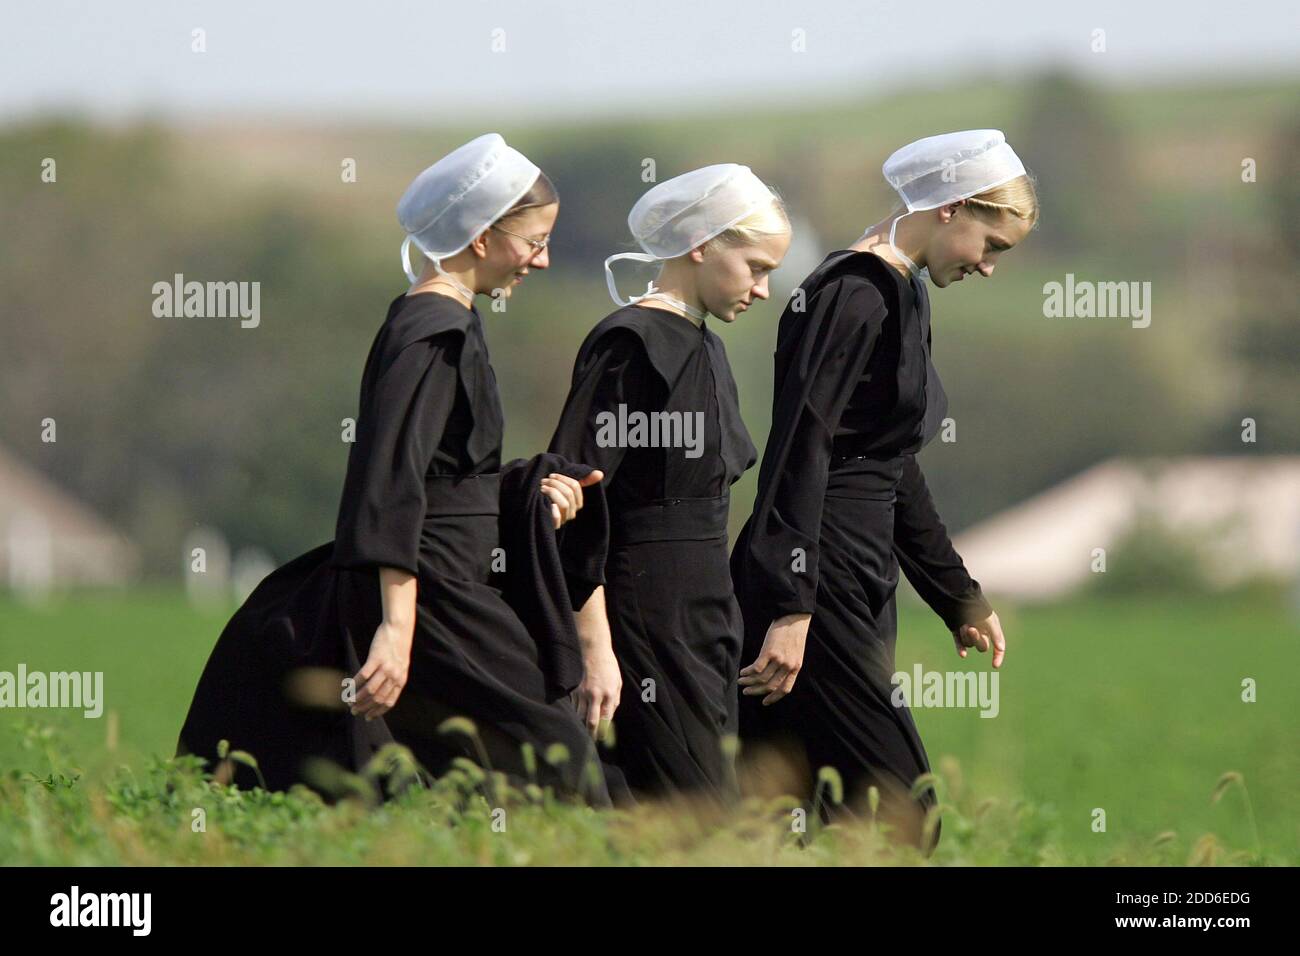 NO FILM, NO VIDEO, NO TV, NO DOCUMENTARY - Three Amish girls walk through a  field on their way to a prayer service in Nickel Mines, Pennsylvania  October 3, 2006. Yesterday Charles